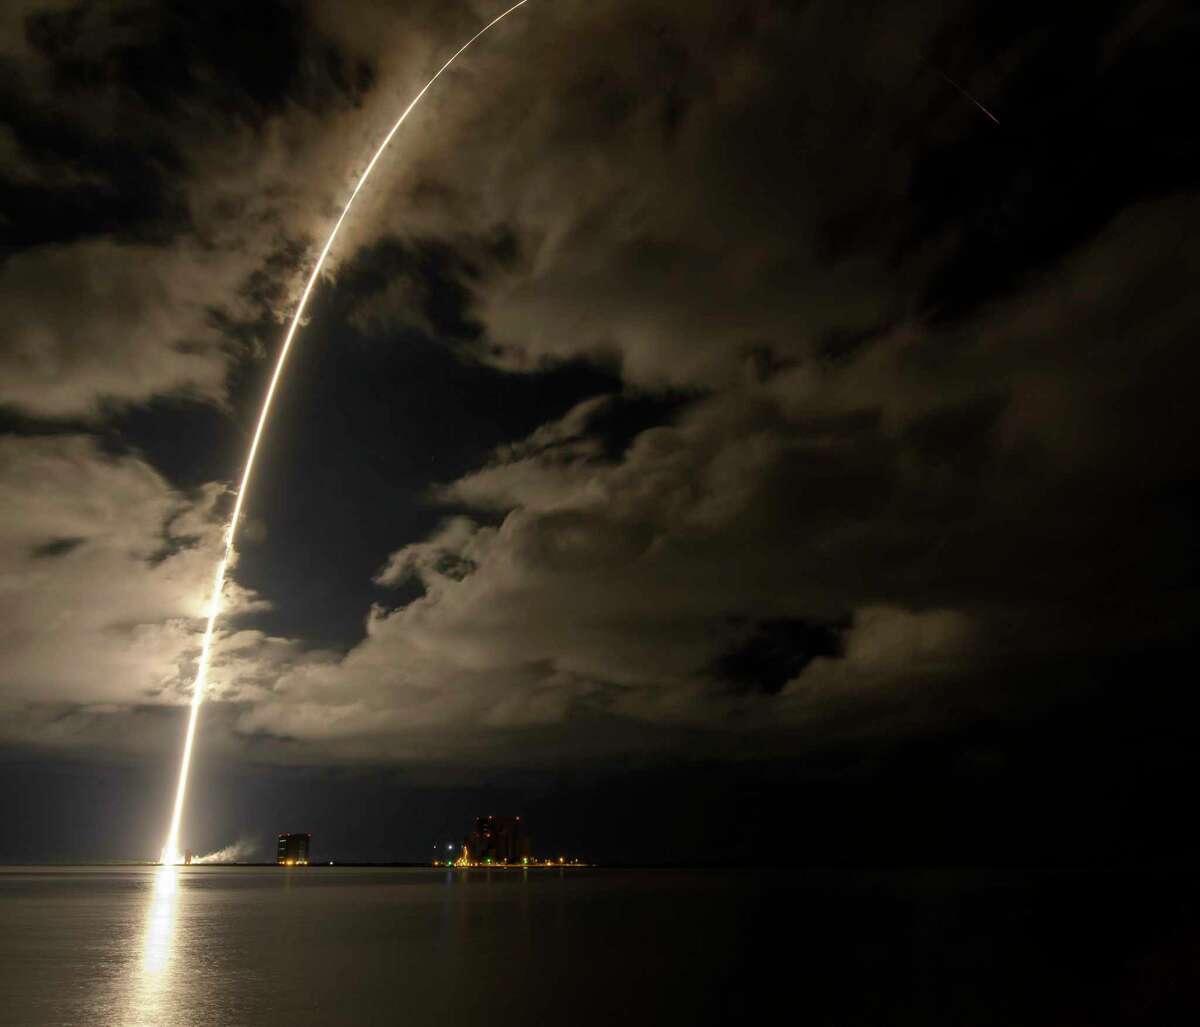 This photo released by NASA, shows a United Launch Alliance Atlas V rocket with the Lucy spacecraft aboard in this 2 minute and 30 second exposure photo as it launches from Space Launch Complex 41, Saturday, Oct. 16, 2021, at Cape Canaveral Space Force Station in Florida. Lucy will be the first spacecraft to study Jupiter's Trojan Asteroids. Like the mission's namesake - the fossilized human ancestor, "Lucy," whose skeleton provided unique insight into humanity's evolution - Lucy will revolutionize our knowledge of planetary origins and the formation of the solar system. (Bill Ingalls/NASA via AP)